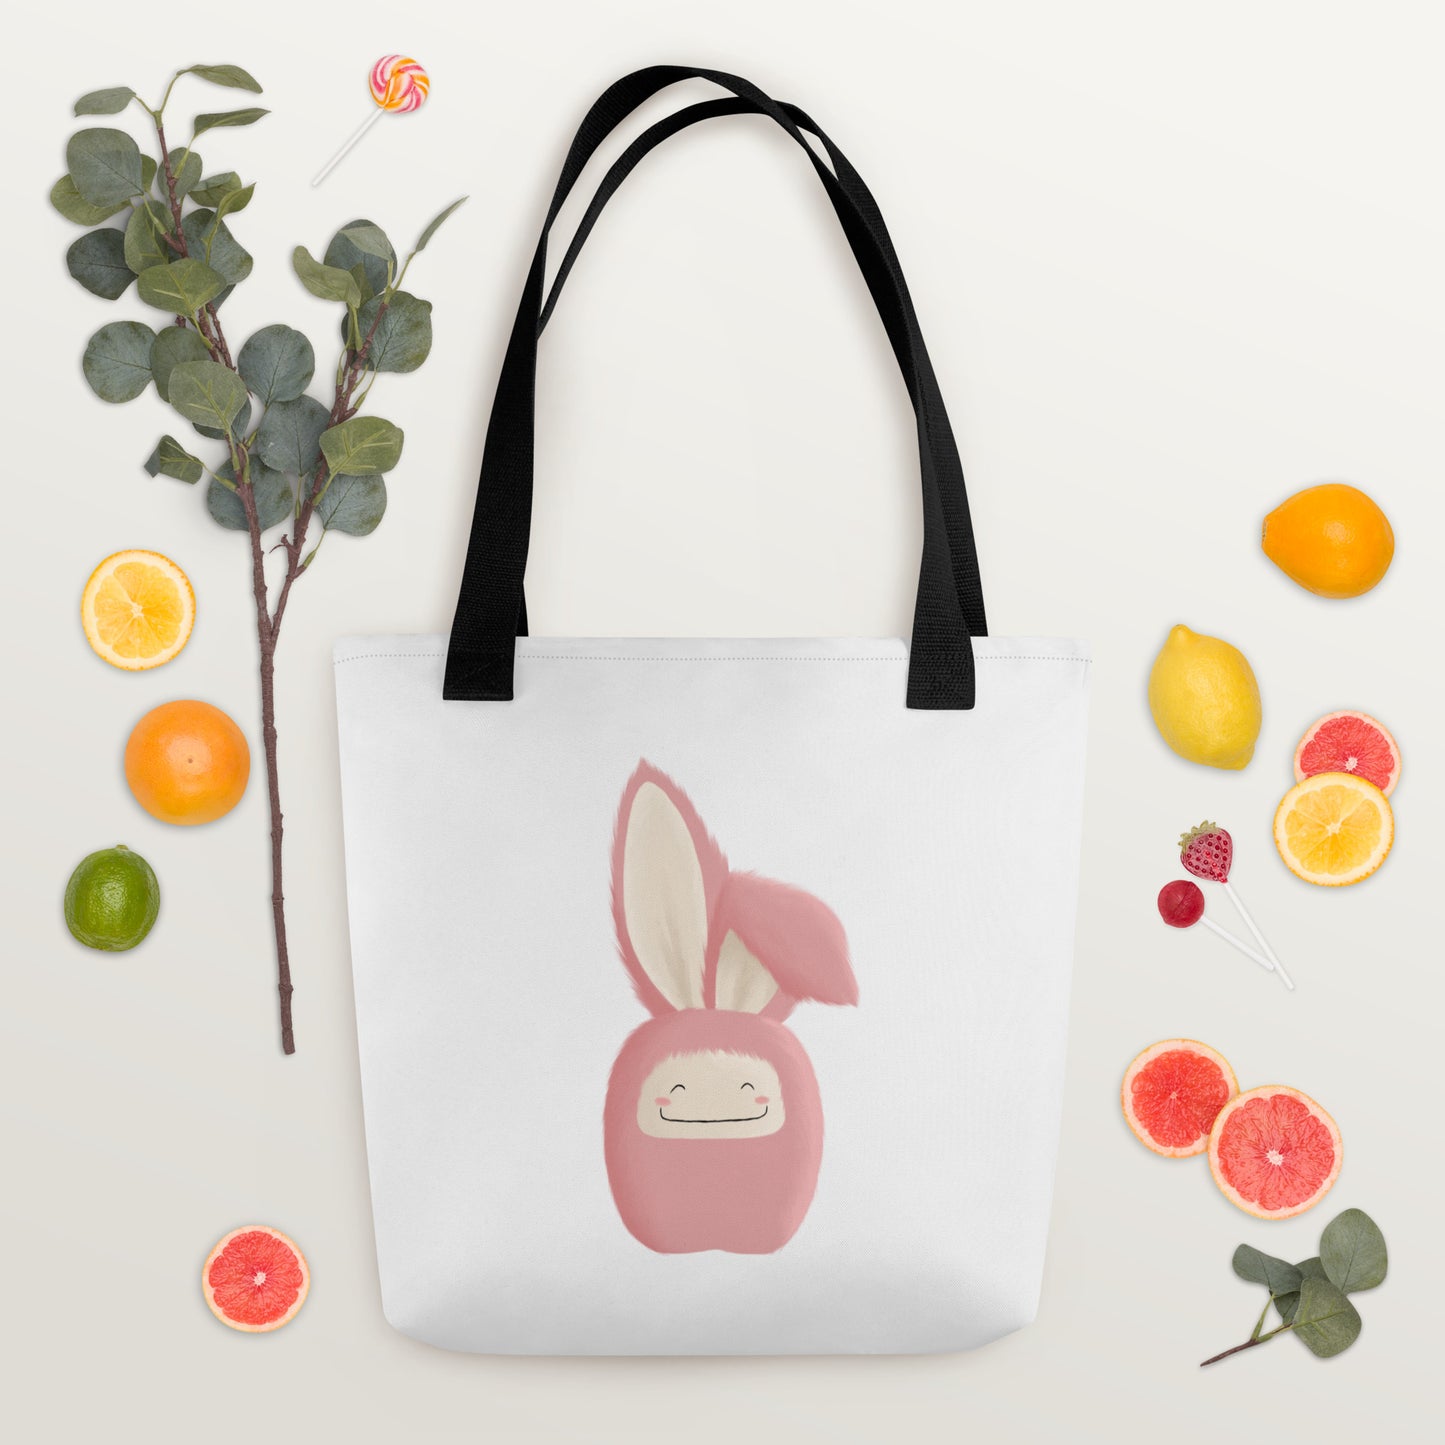 Tote bag Bunny Floppy Ear Pink